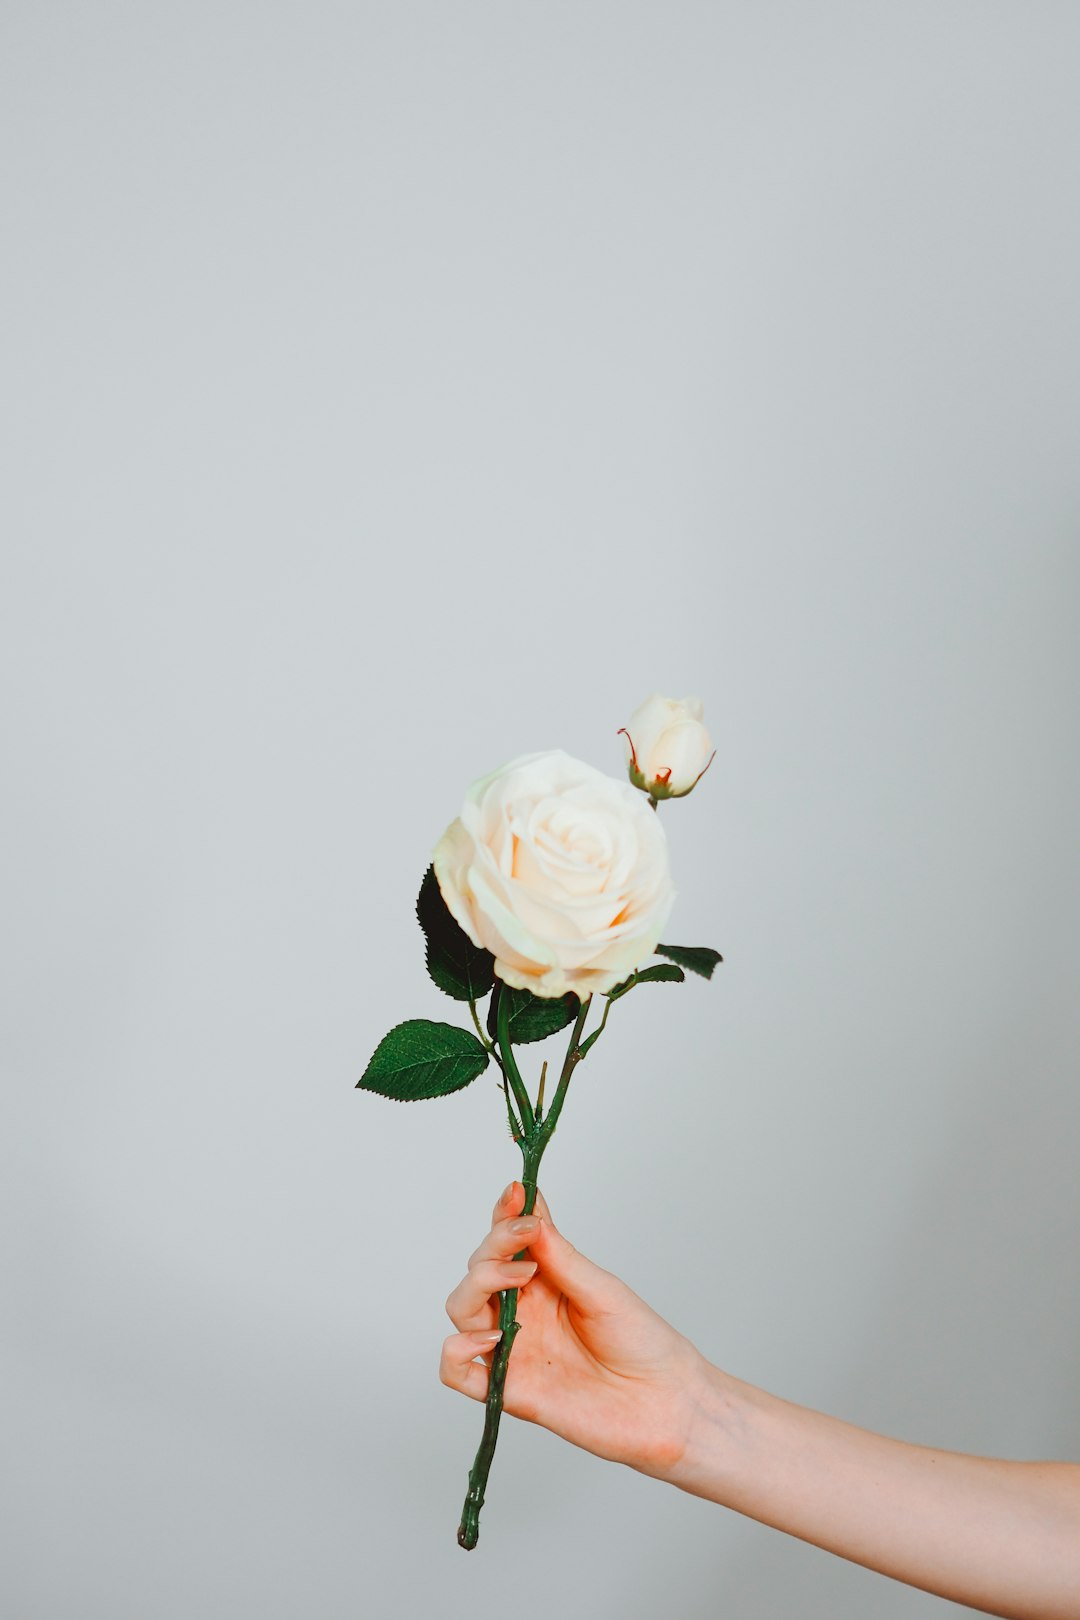 person holding white rose in bloom